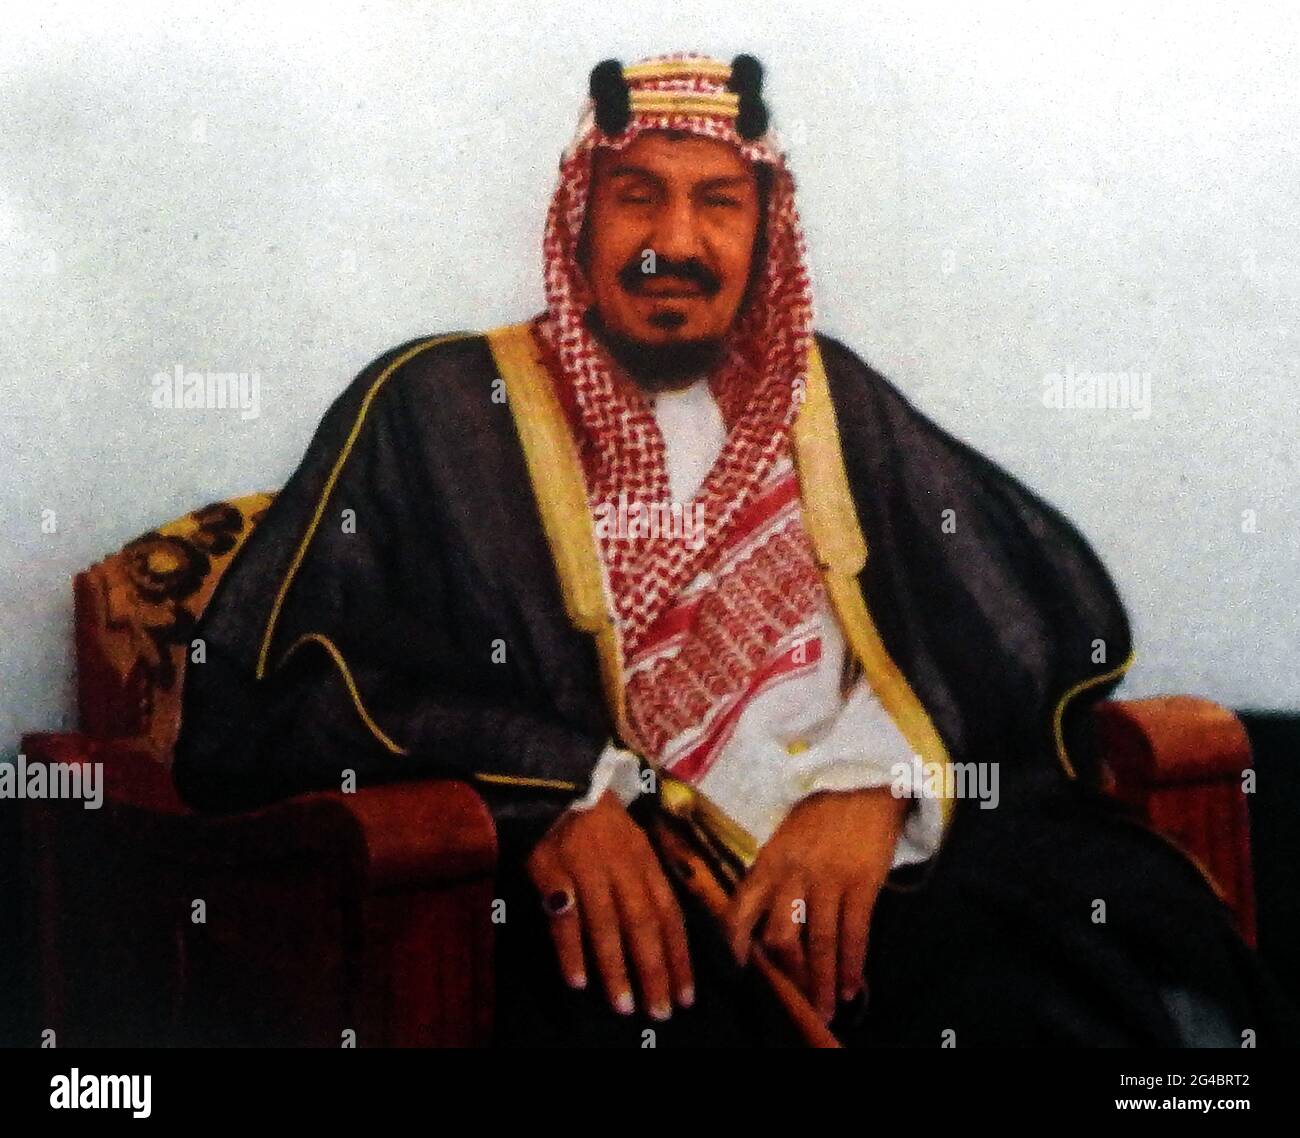 A 1948 magazine colour portrait of King Abdul Aziz al Saud /  Abdulaziz Al Saud / Abdulaziz / Ibn Saud / Abd al ʿAzīz bin ʿAbd ar Raḥman Āl Suʿūd (1876-1853)  .  He was founder and first monarch  of the kingdom of Saudi Arabia. As king he  controlled  the discovery of petroleum in Saudi Arabia in 1938 and in effect promoted large-scale oil production making the region immensely rich. The kind and charitable king  established a guest house known as the 'Thulaim' or 'The Host' where the poor were given food such as  rice, meat, and varieties of porridge to eat and adequate clothing. Stock Photo